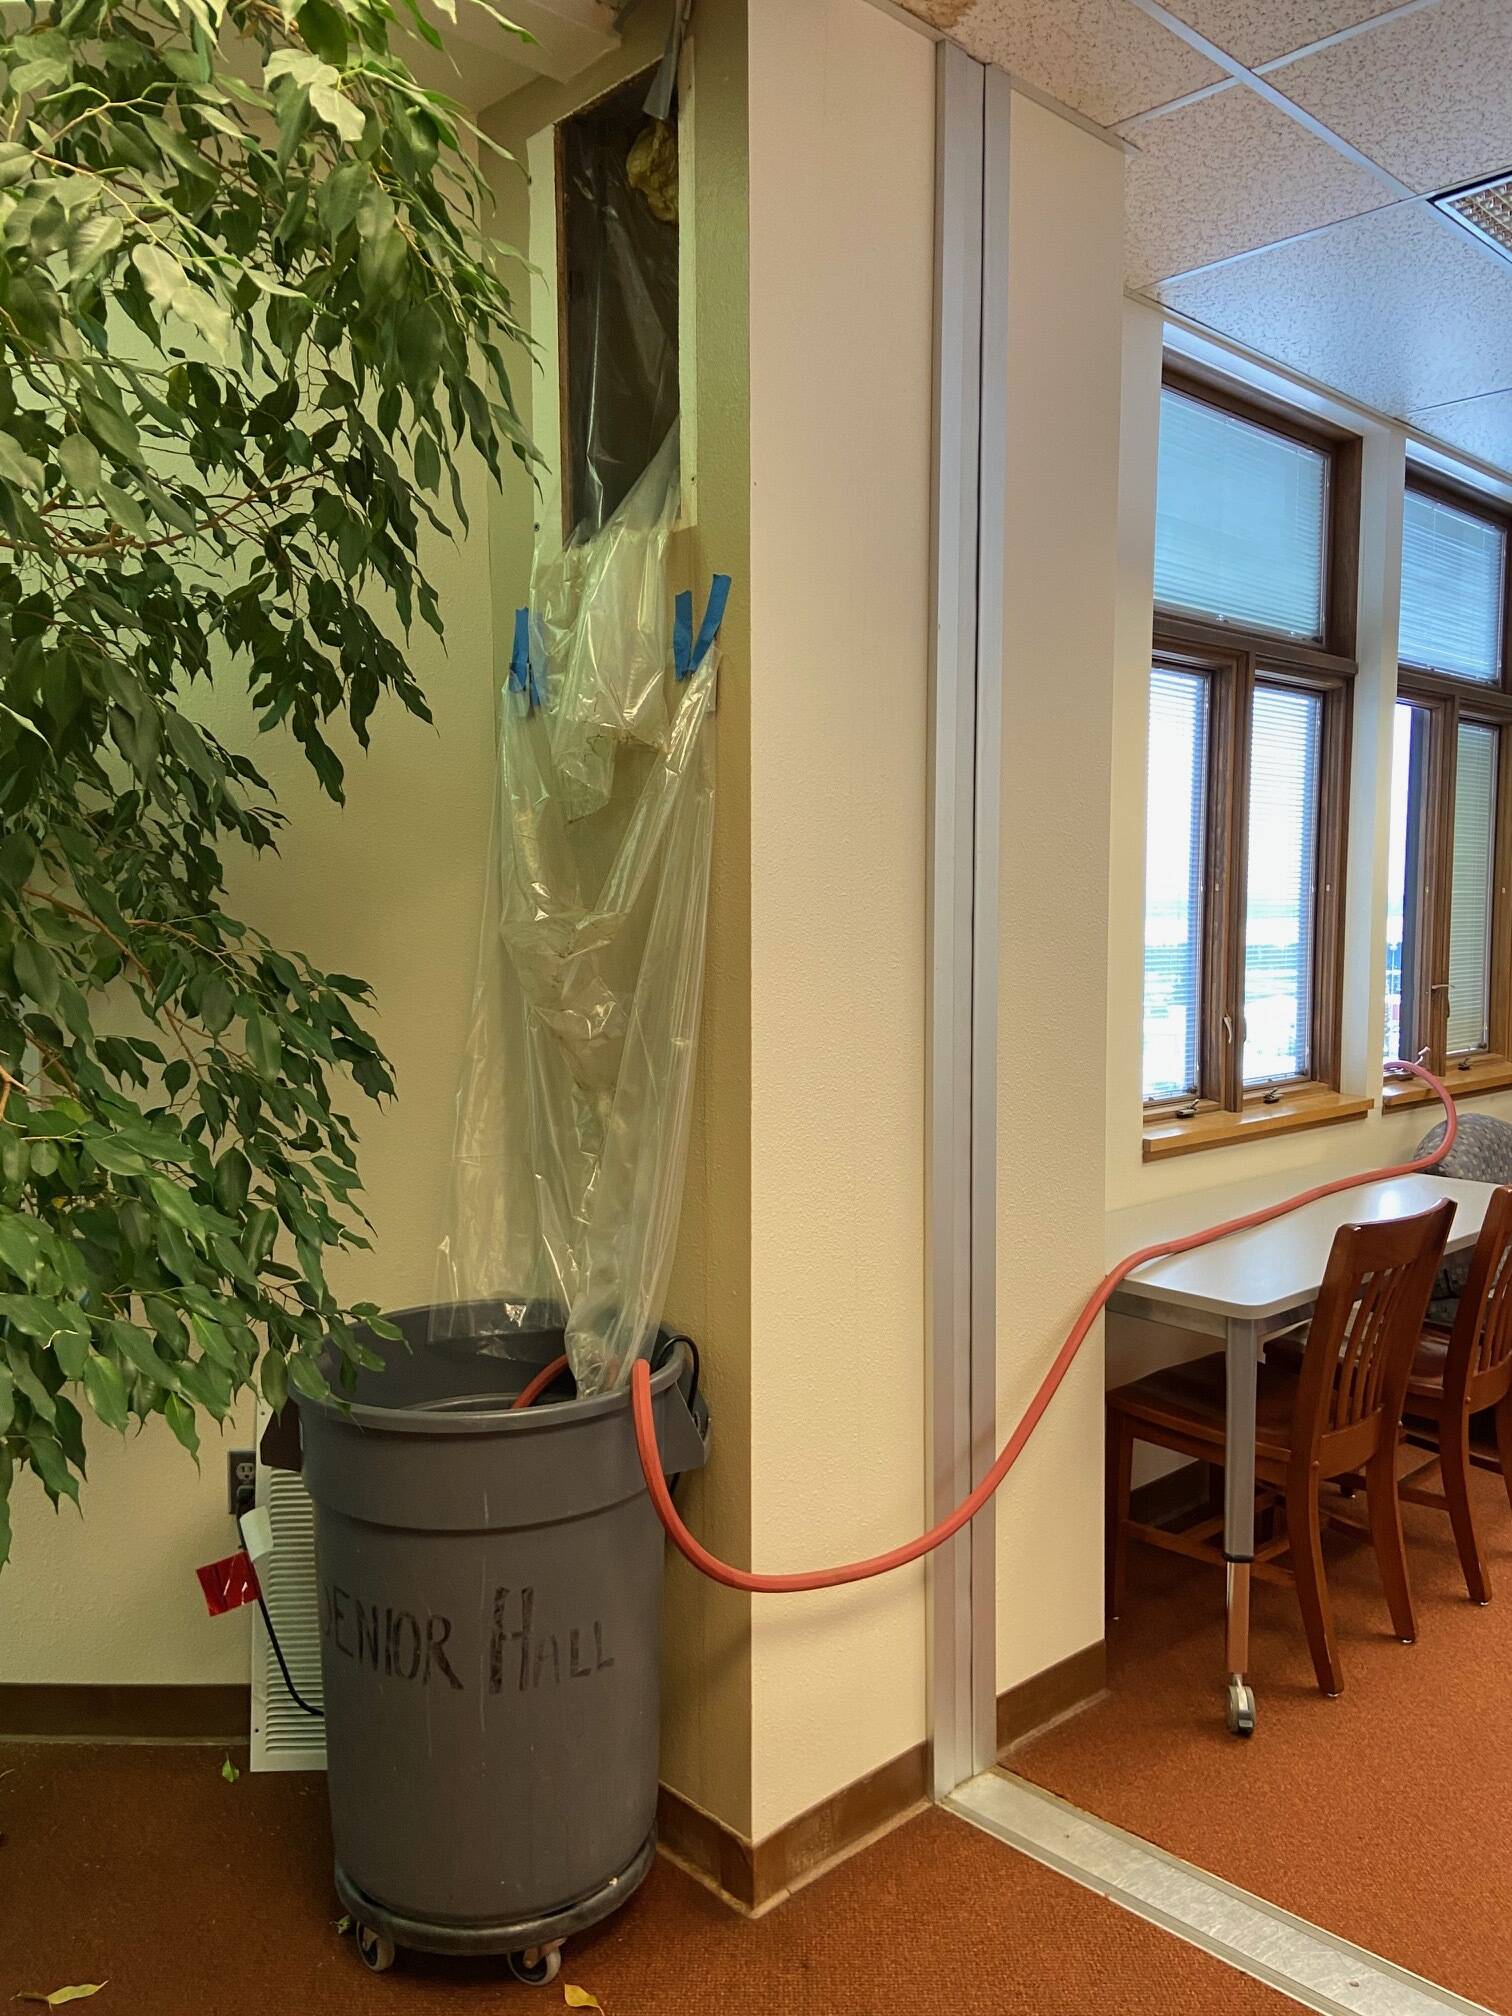 A trash can holds a sump pump that pumps water out of the window in the Homer High School library on Monday, Jan. 23, 2023 in Homer, Alaska. Photo courtesy of Deb Curtis